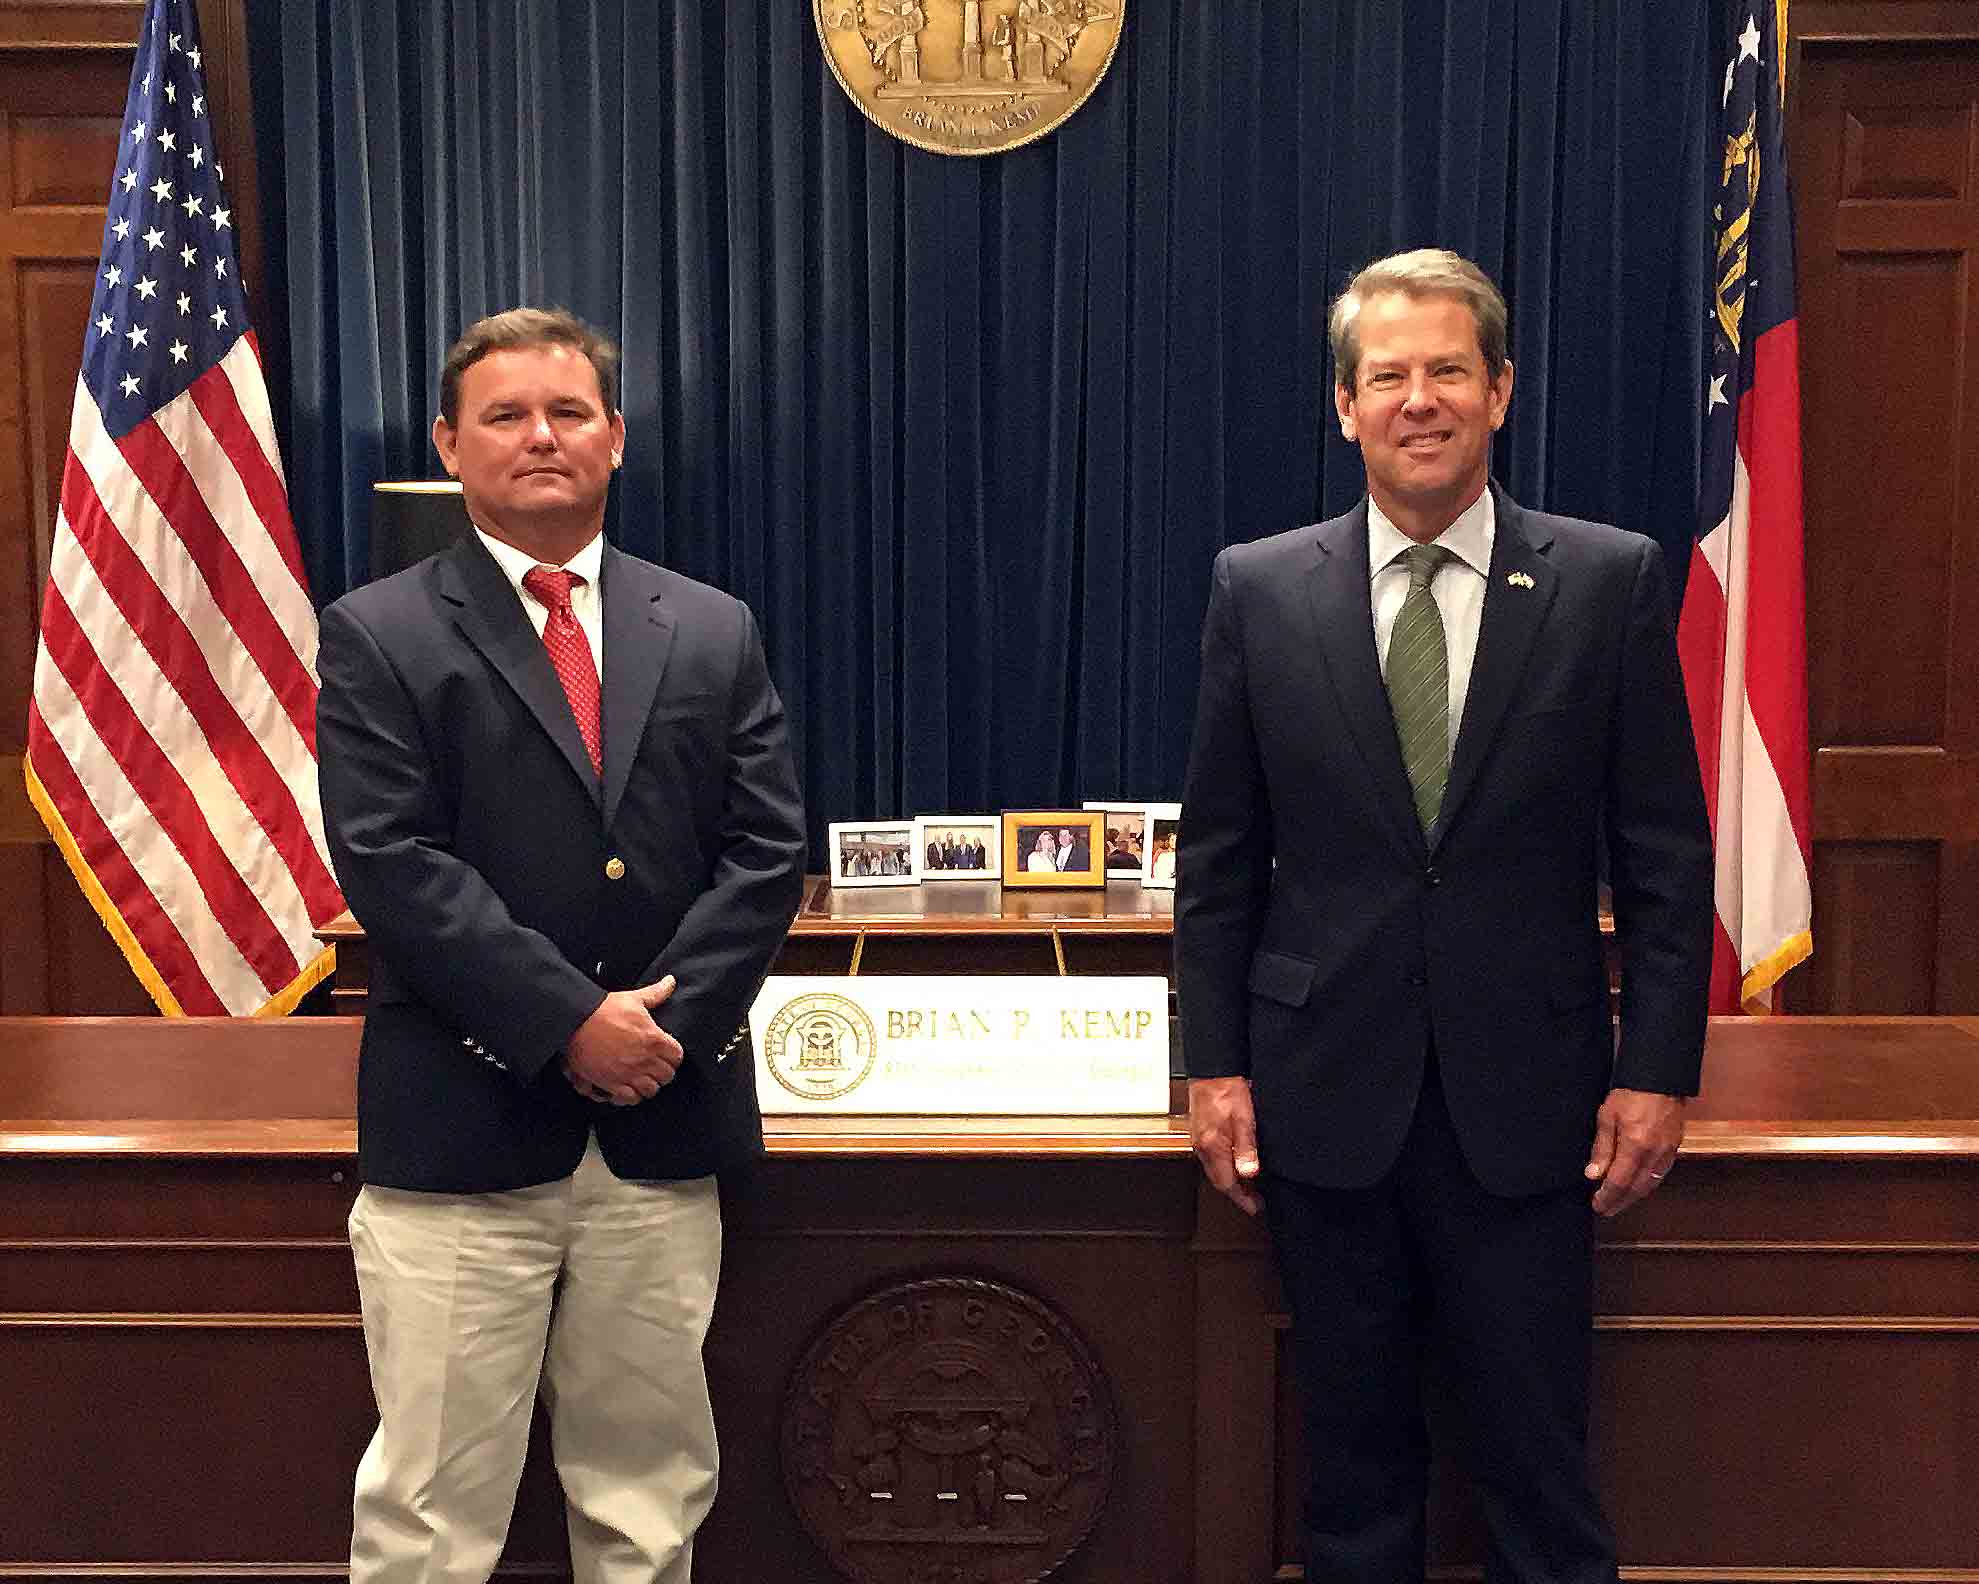 Governor Brian Kemp recognized Lee Nunn of Madison, Georgia, as the 2020 Farmer of the Year on July 8, 2020.